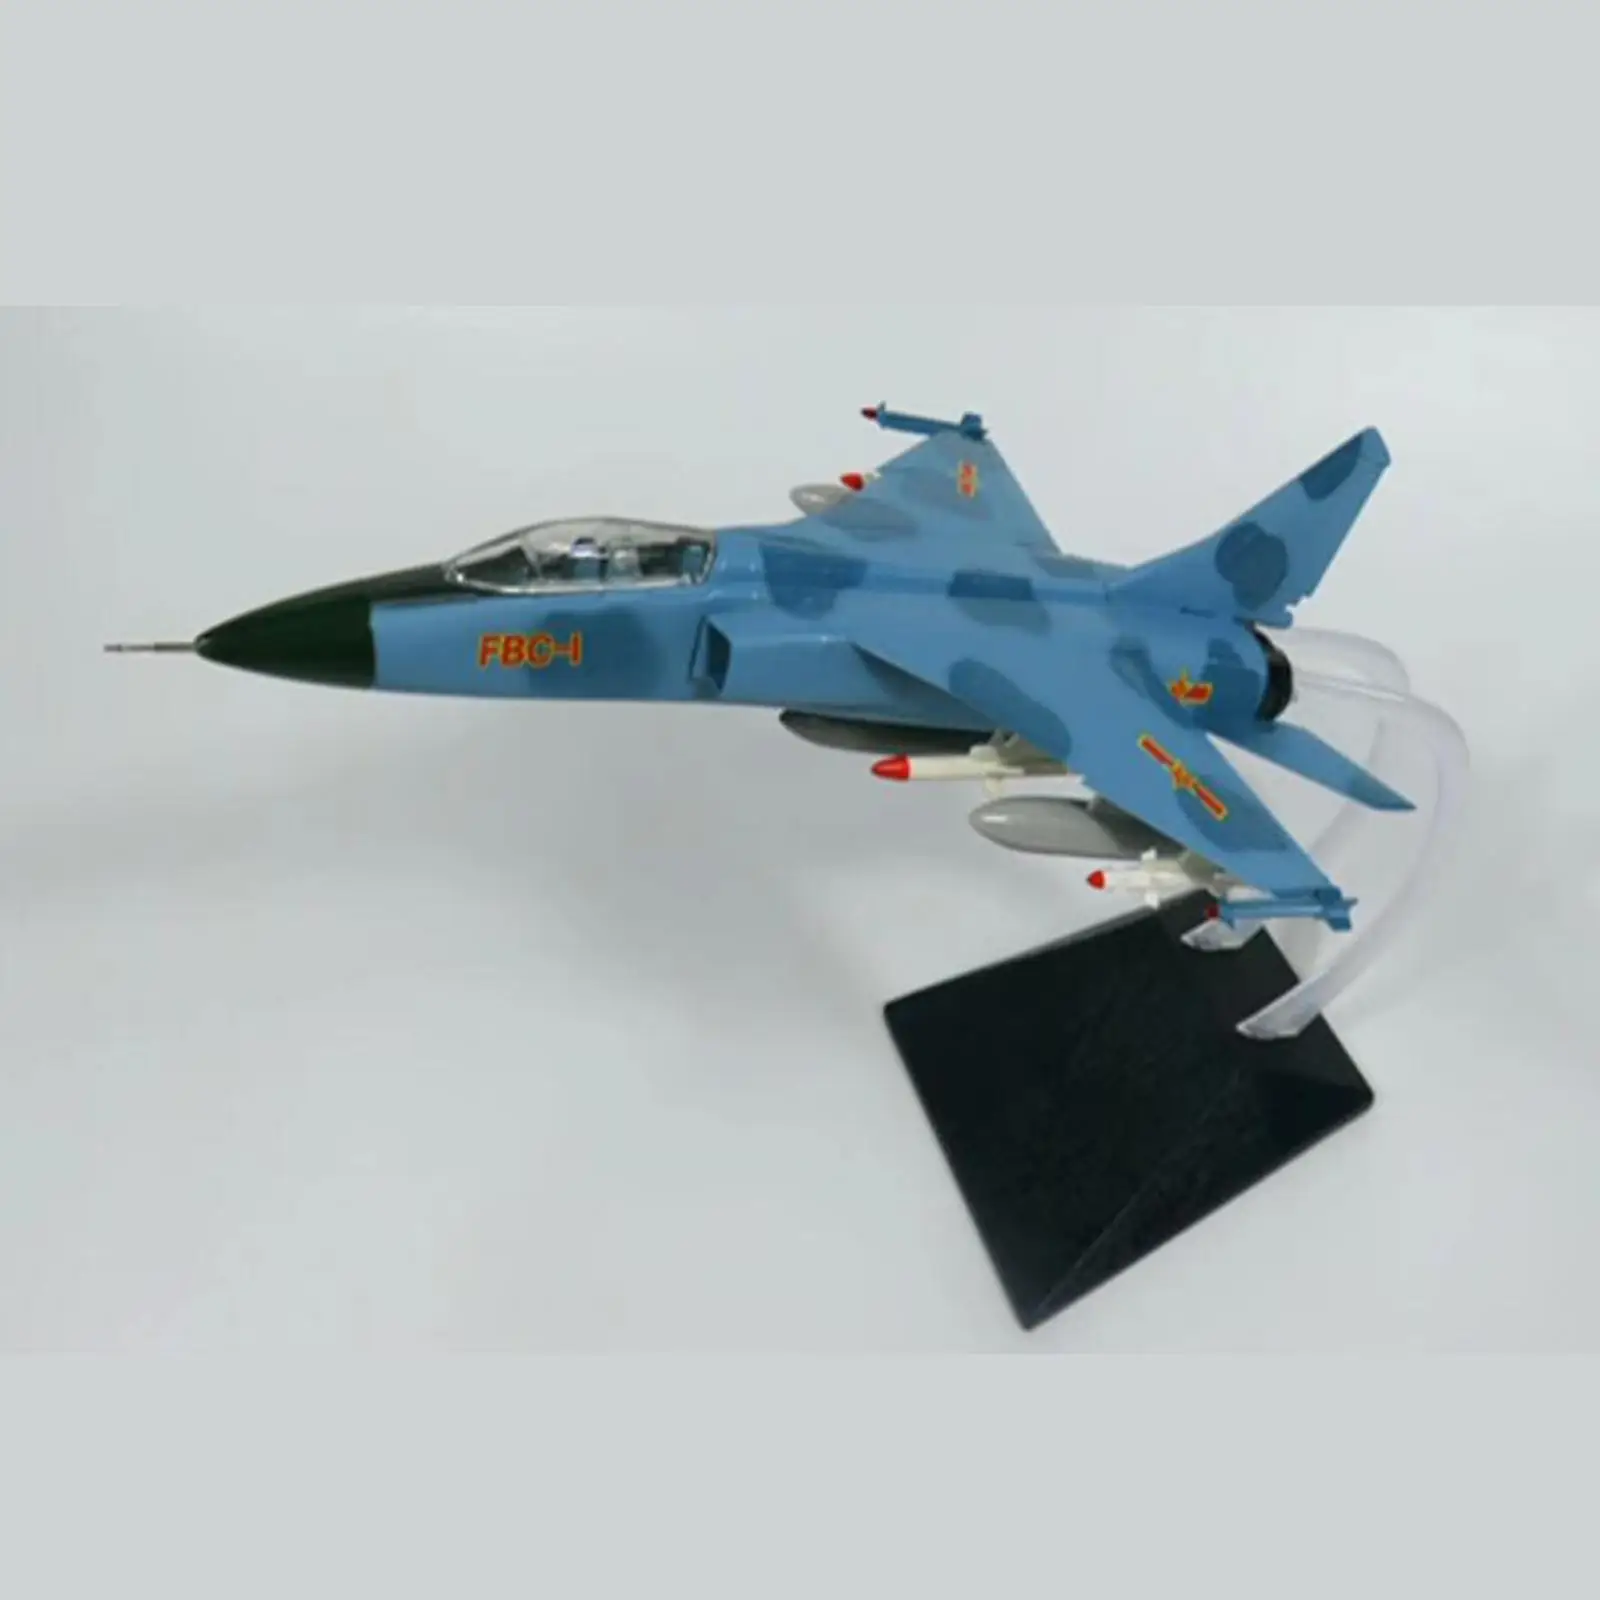 1/72 Plane Model Educational Toy Ornament 1:72 Model Airplane Miniature Aircraft Model for Boys Adults Kids Girls Children